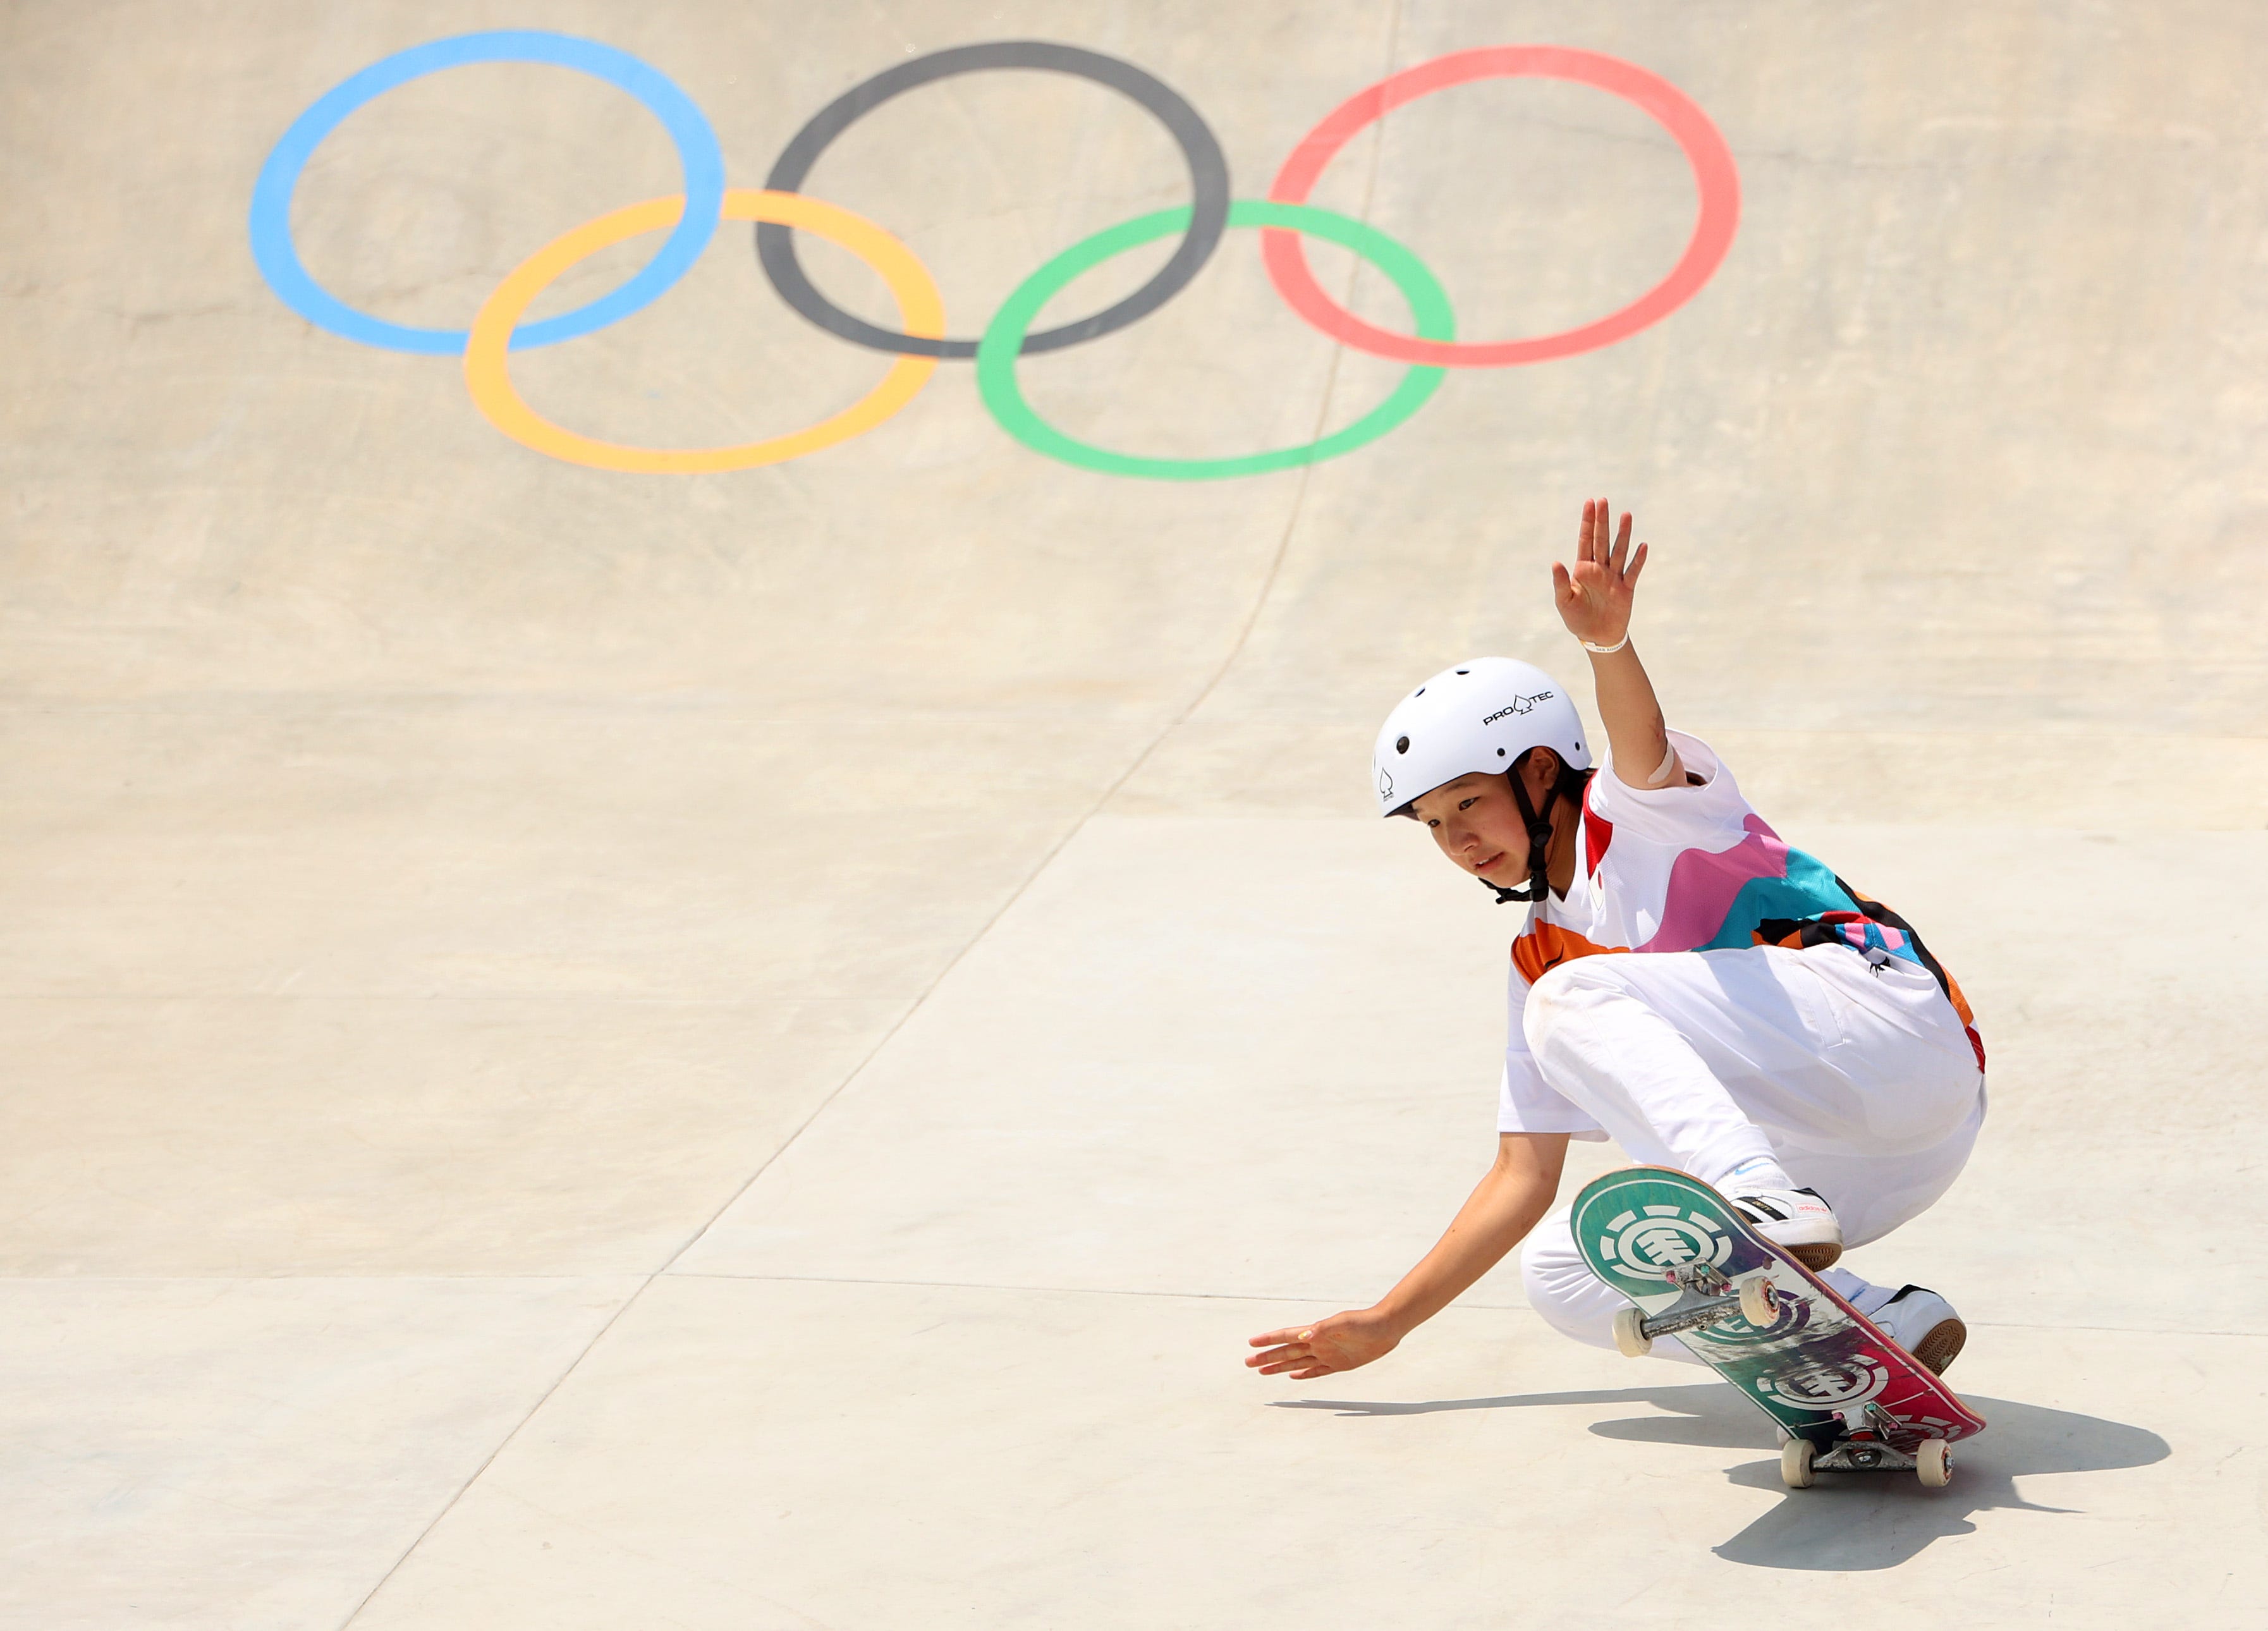 Skateboarding's Olympics debut in Tokyo a big moment for sport's women